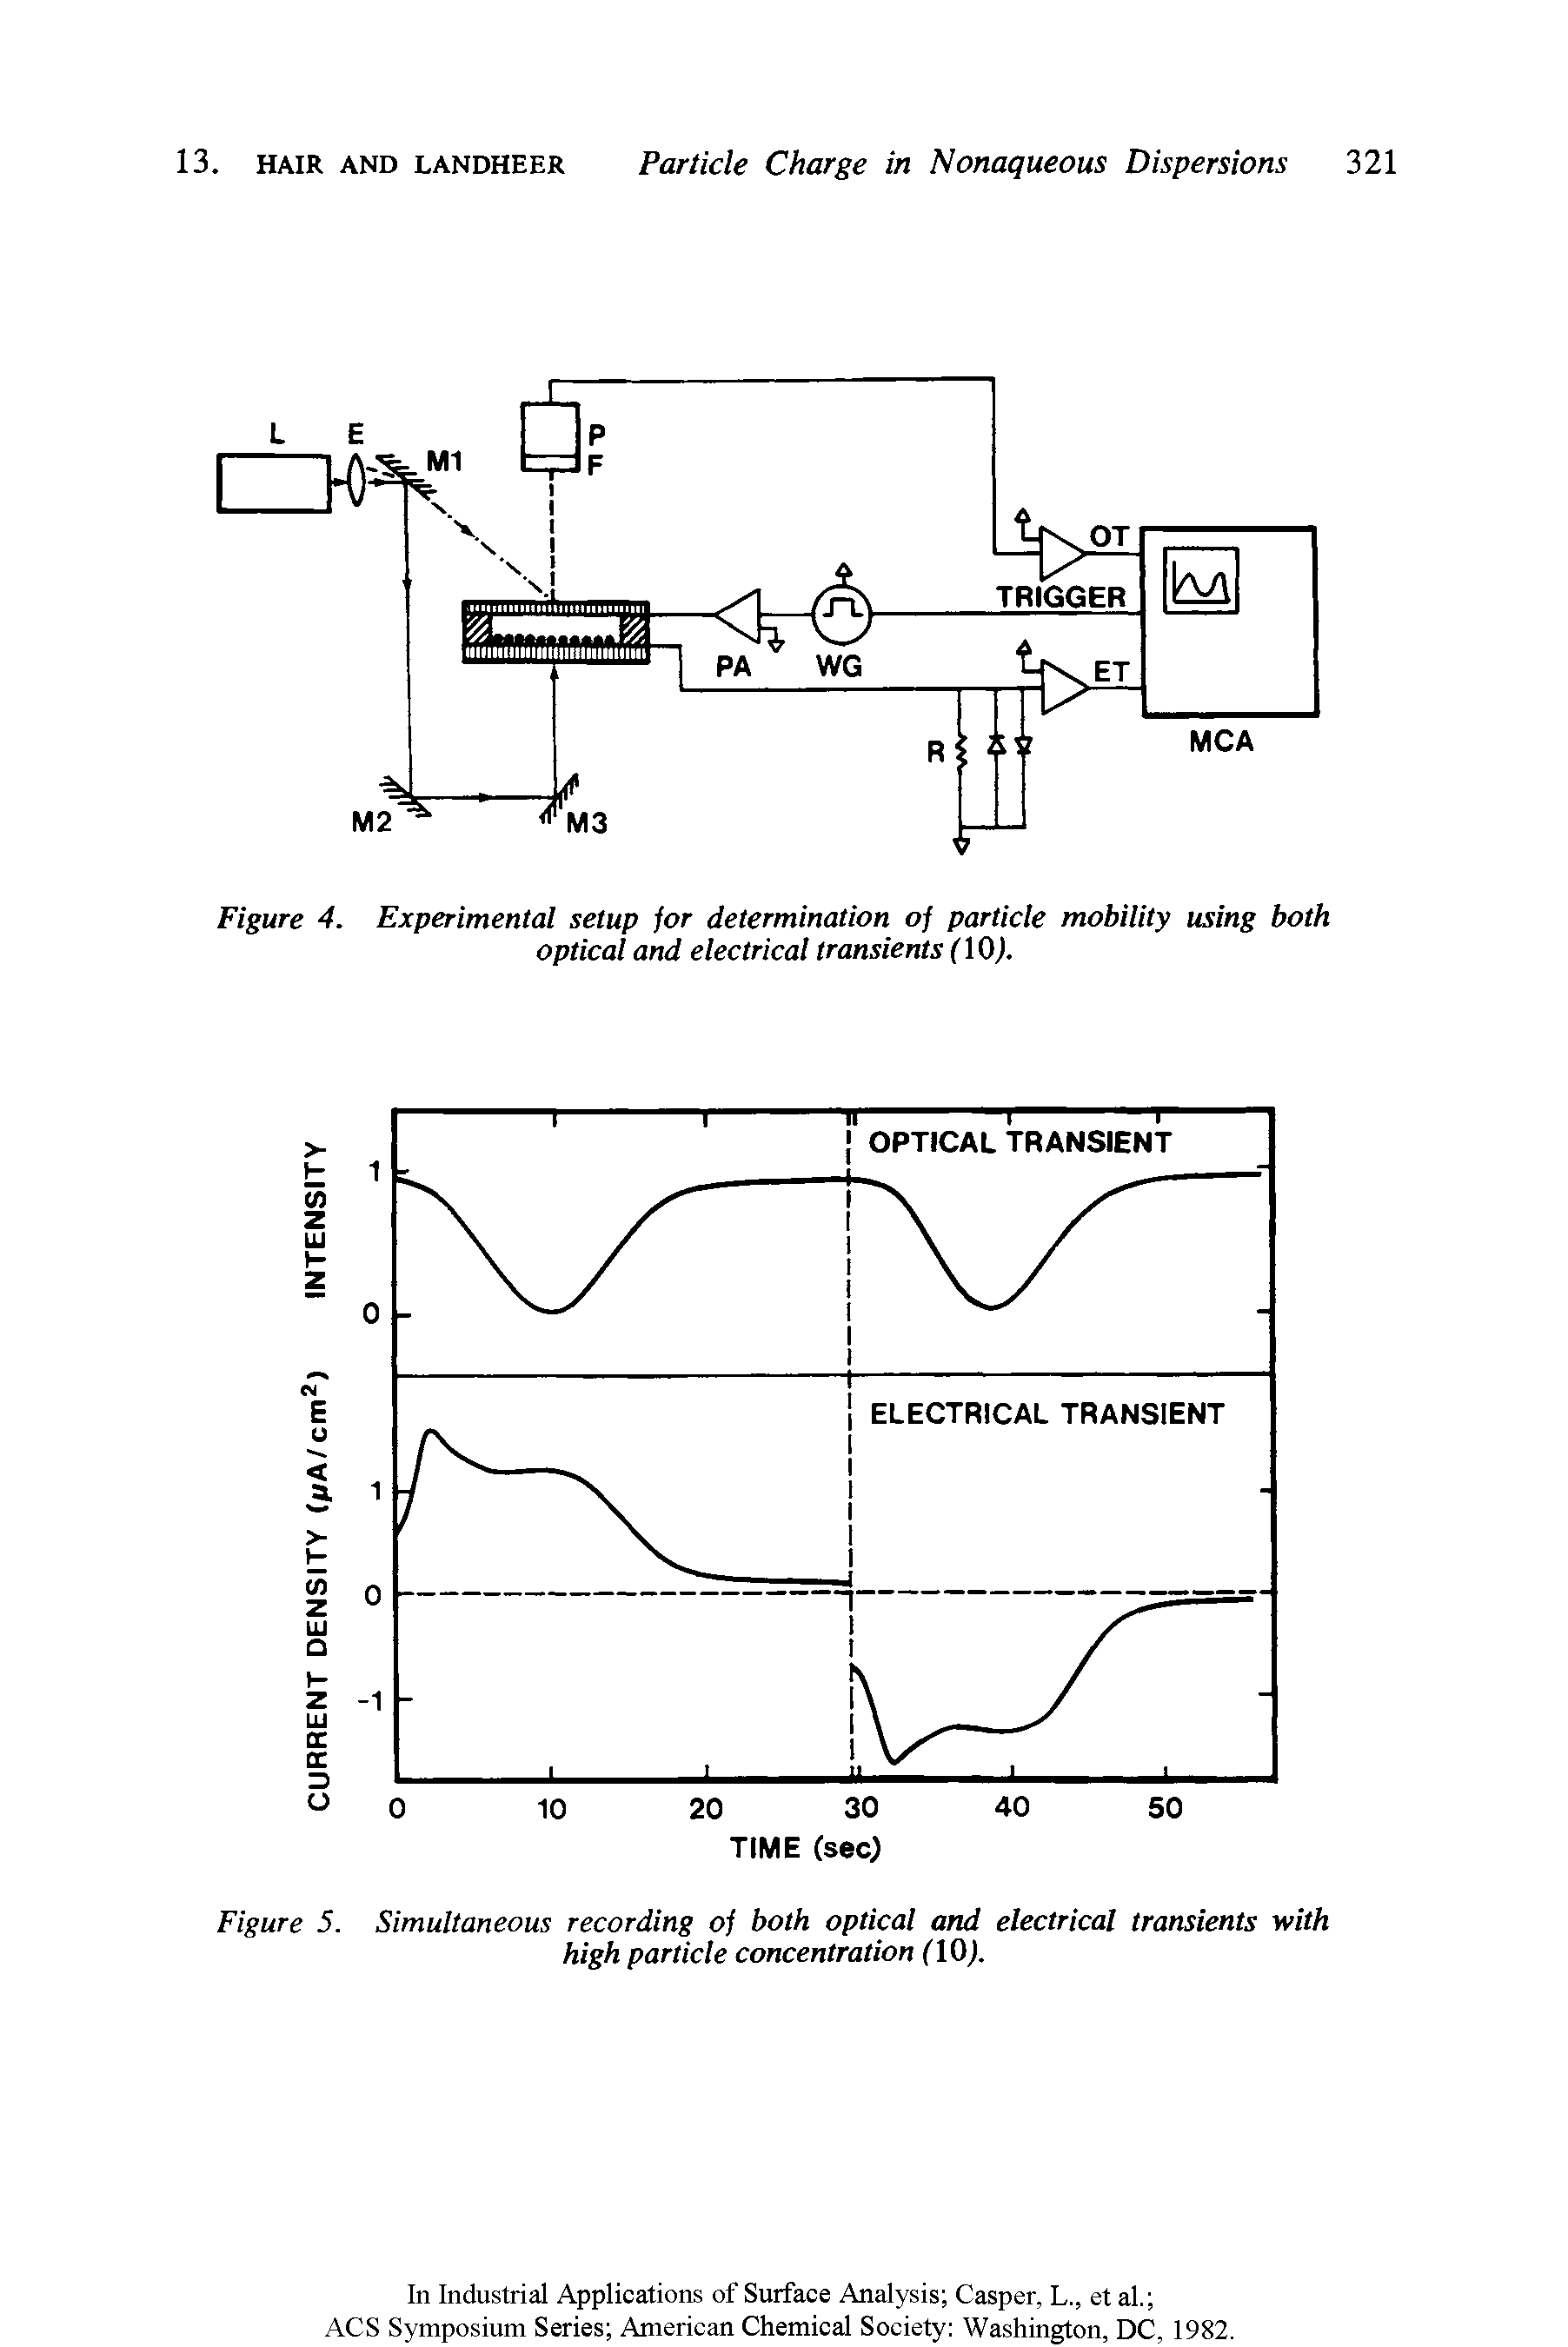 Figure 4. Experimental setup for determination of particle mobility using both optical and electrical transients (10).